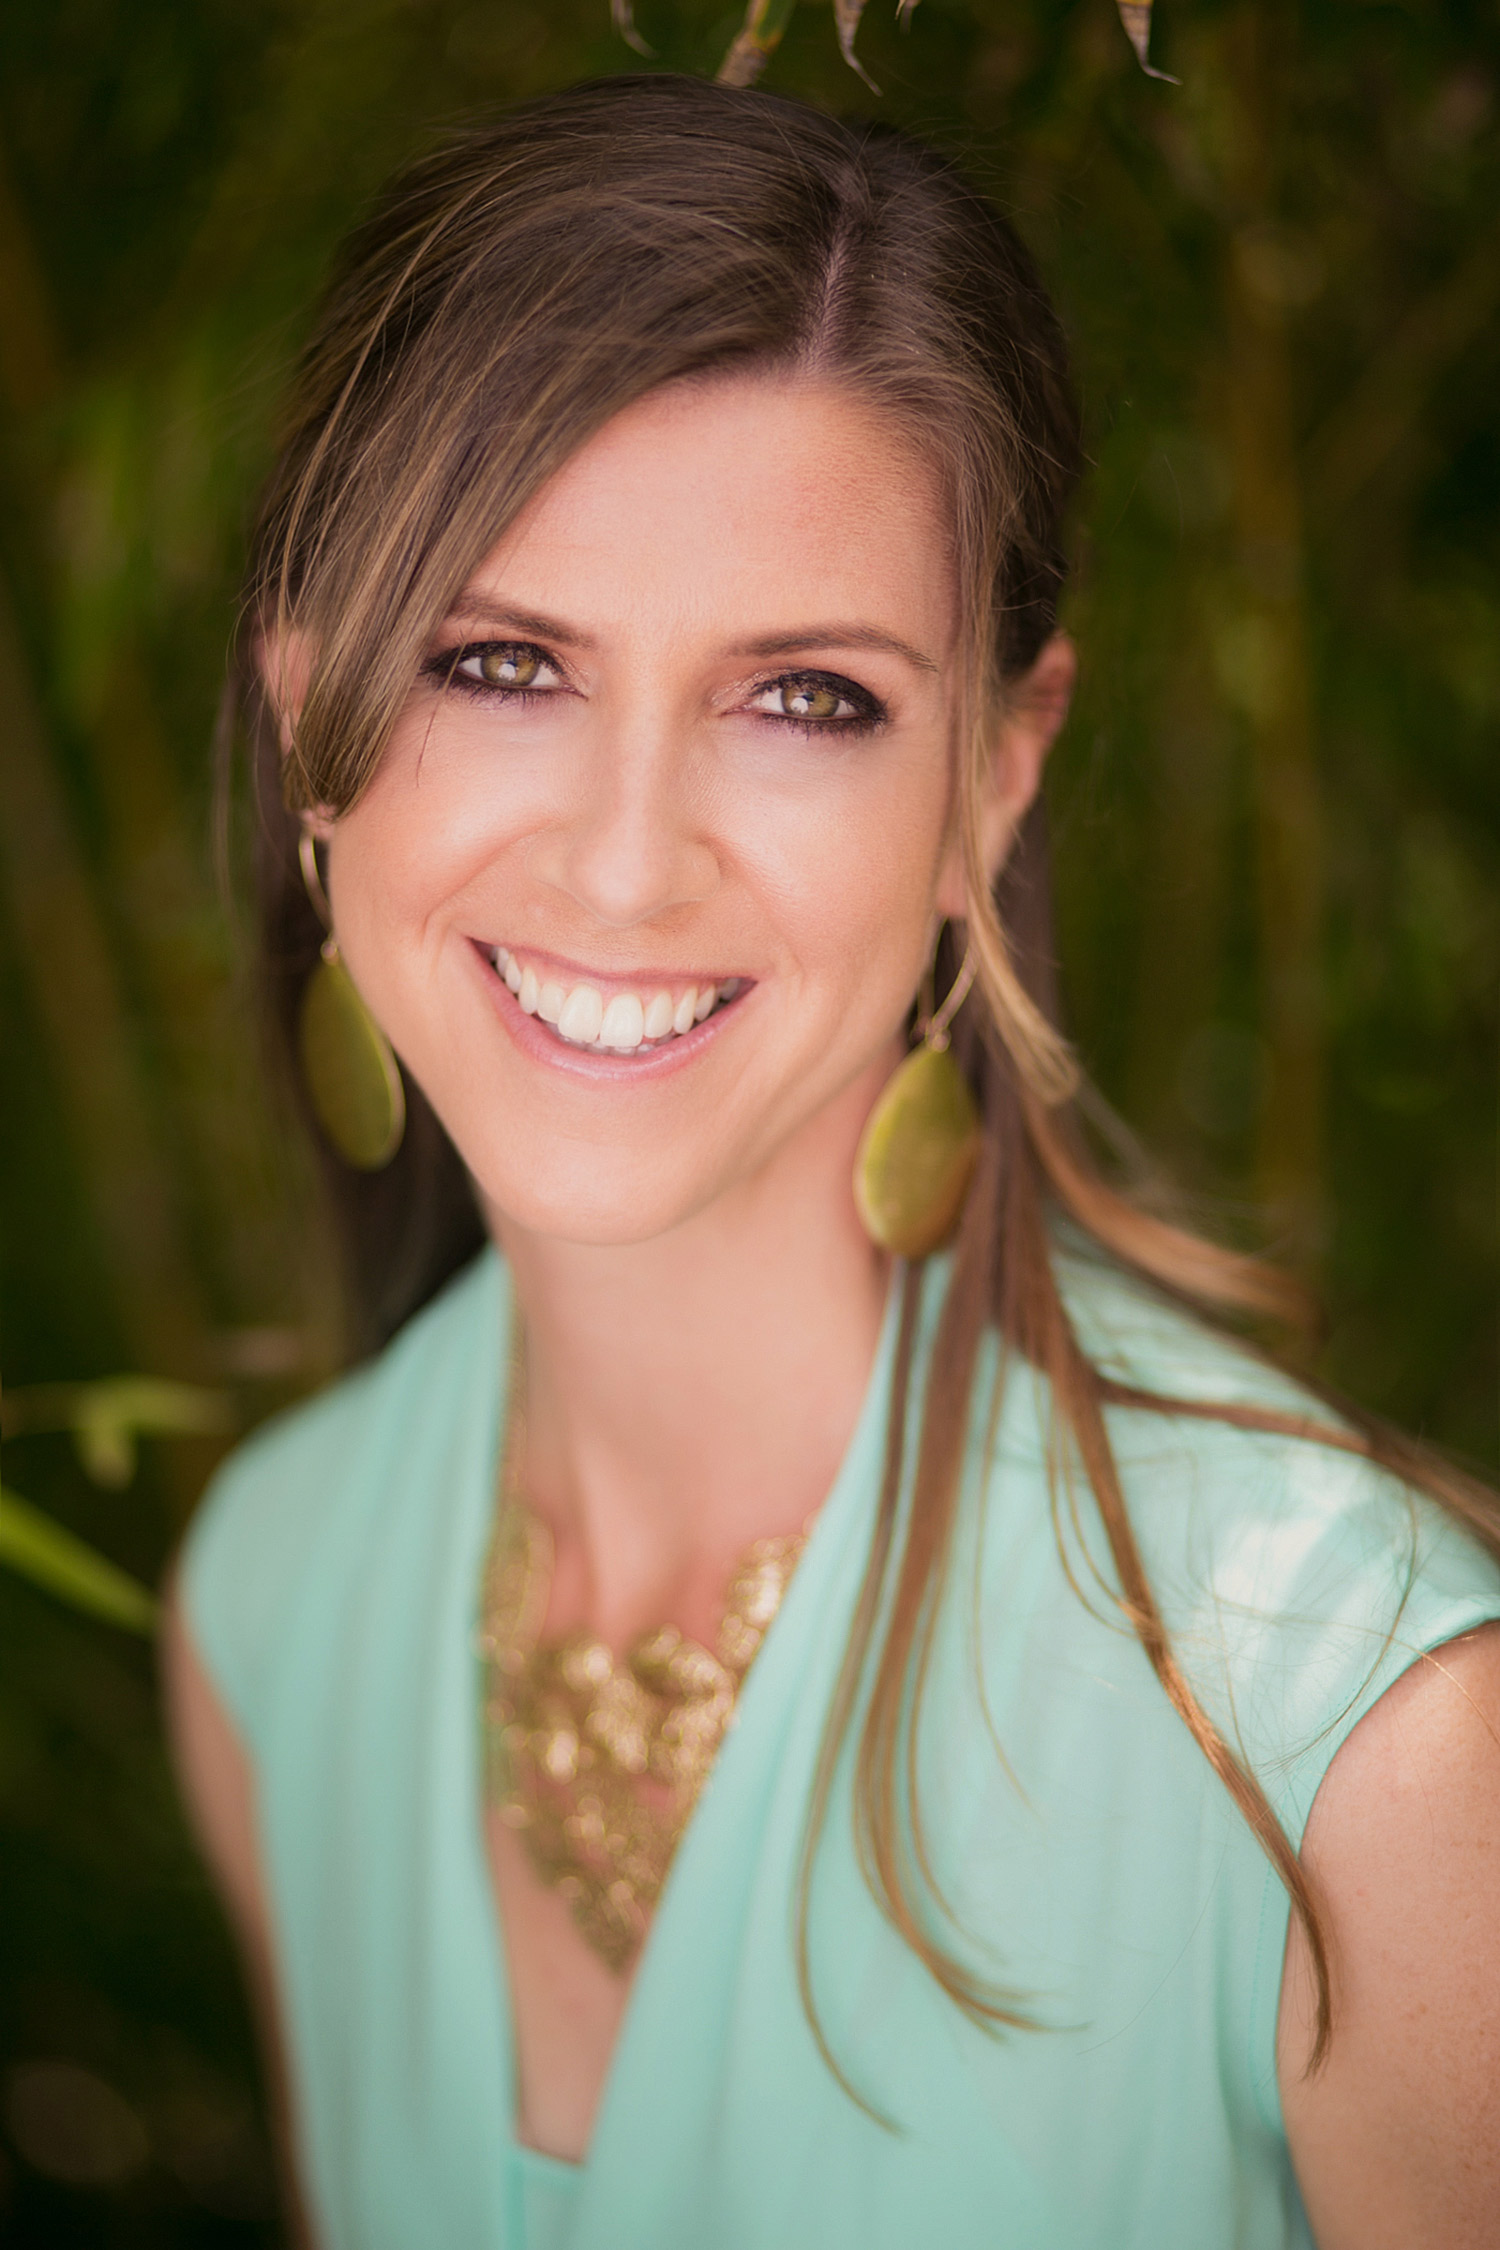 I’m Heidi Brockmyre, M.S., L.AC.. - (Masters of Science in Oriental Medicine and licensed acupuncturist), fertility coach, acupuncturist and speaker